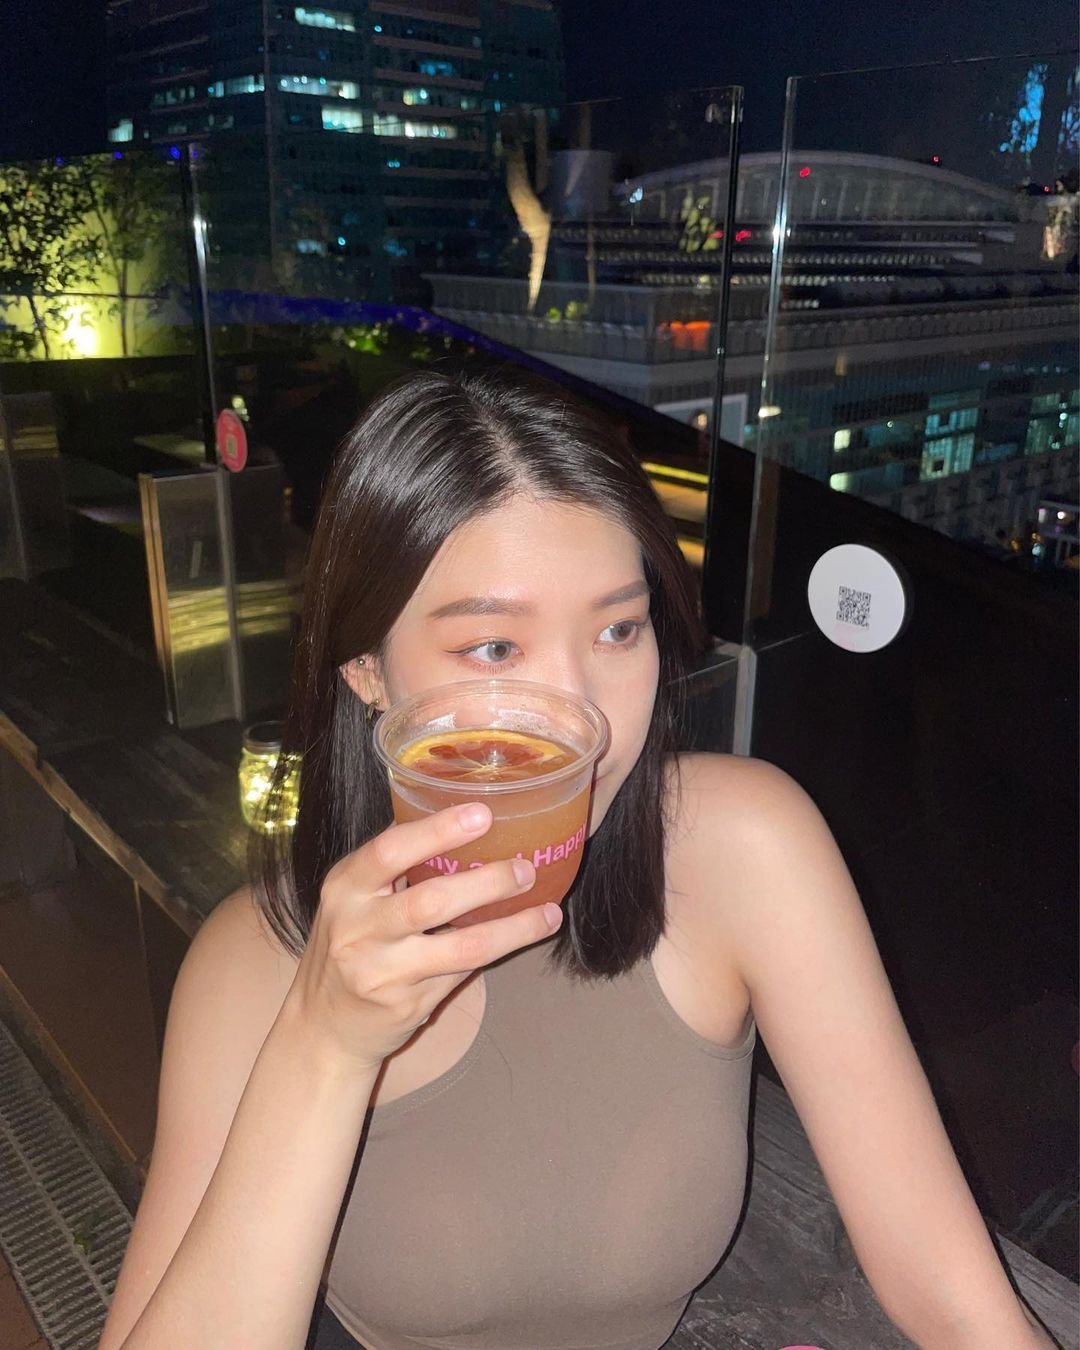 My name is Susan and I am 31 years old. Nice to meet you. I am from Taiwan and now I am in Seoul    https://t.co/cr4HH4bjdB